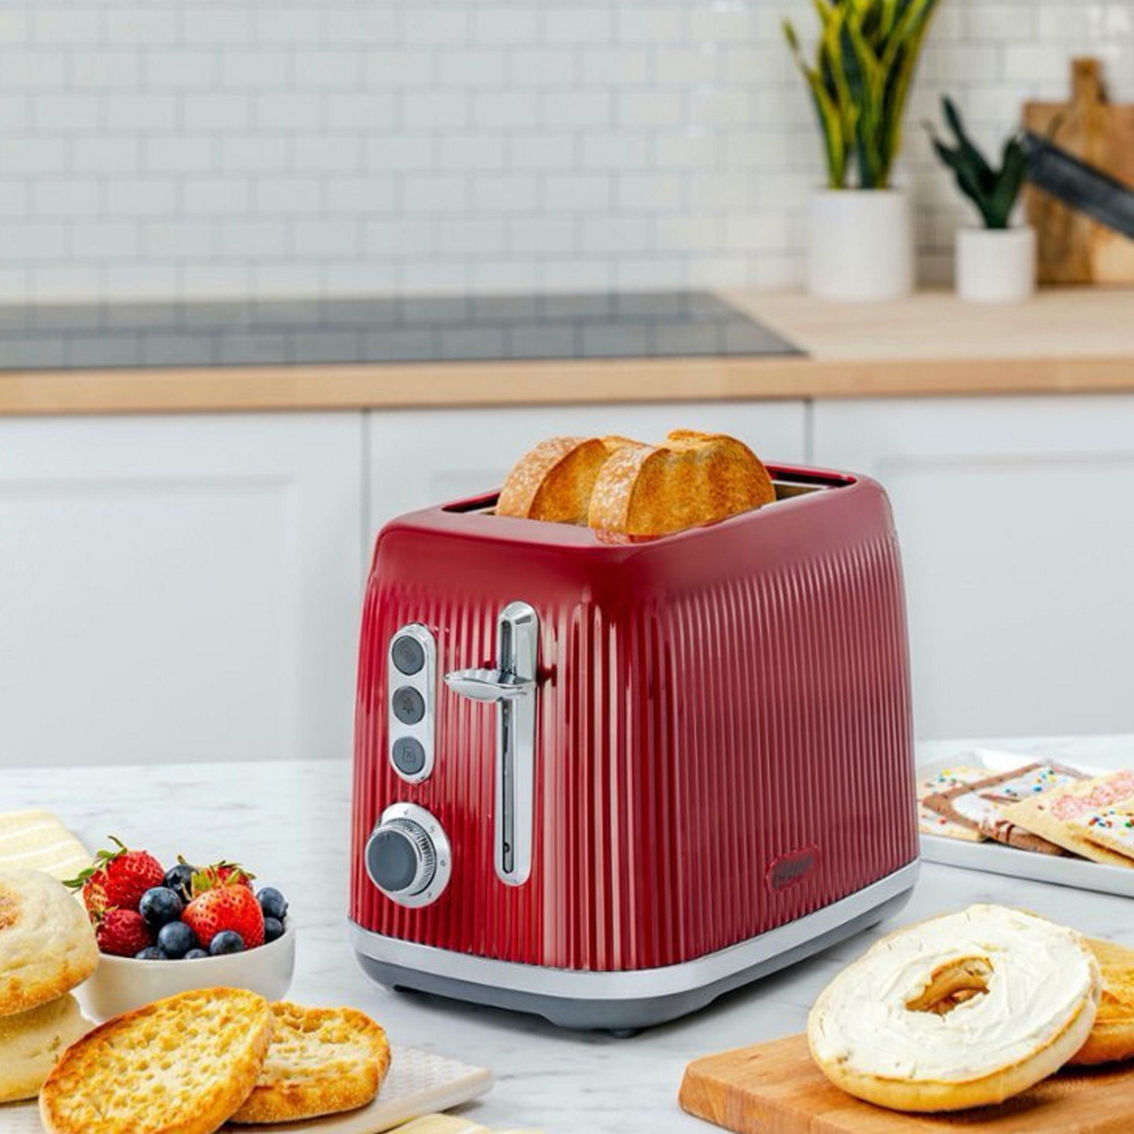 Oster Retro 2 Slice Toaster with Extra Wide Slots in Red - Image 3 of 3